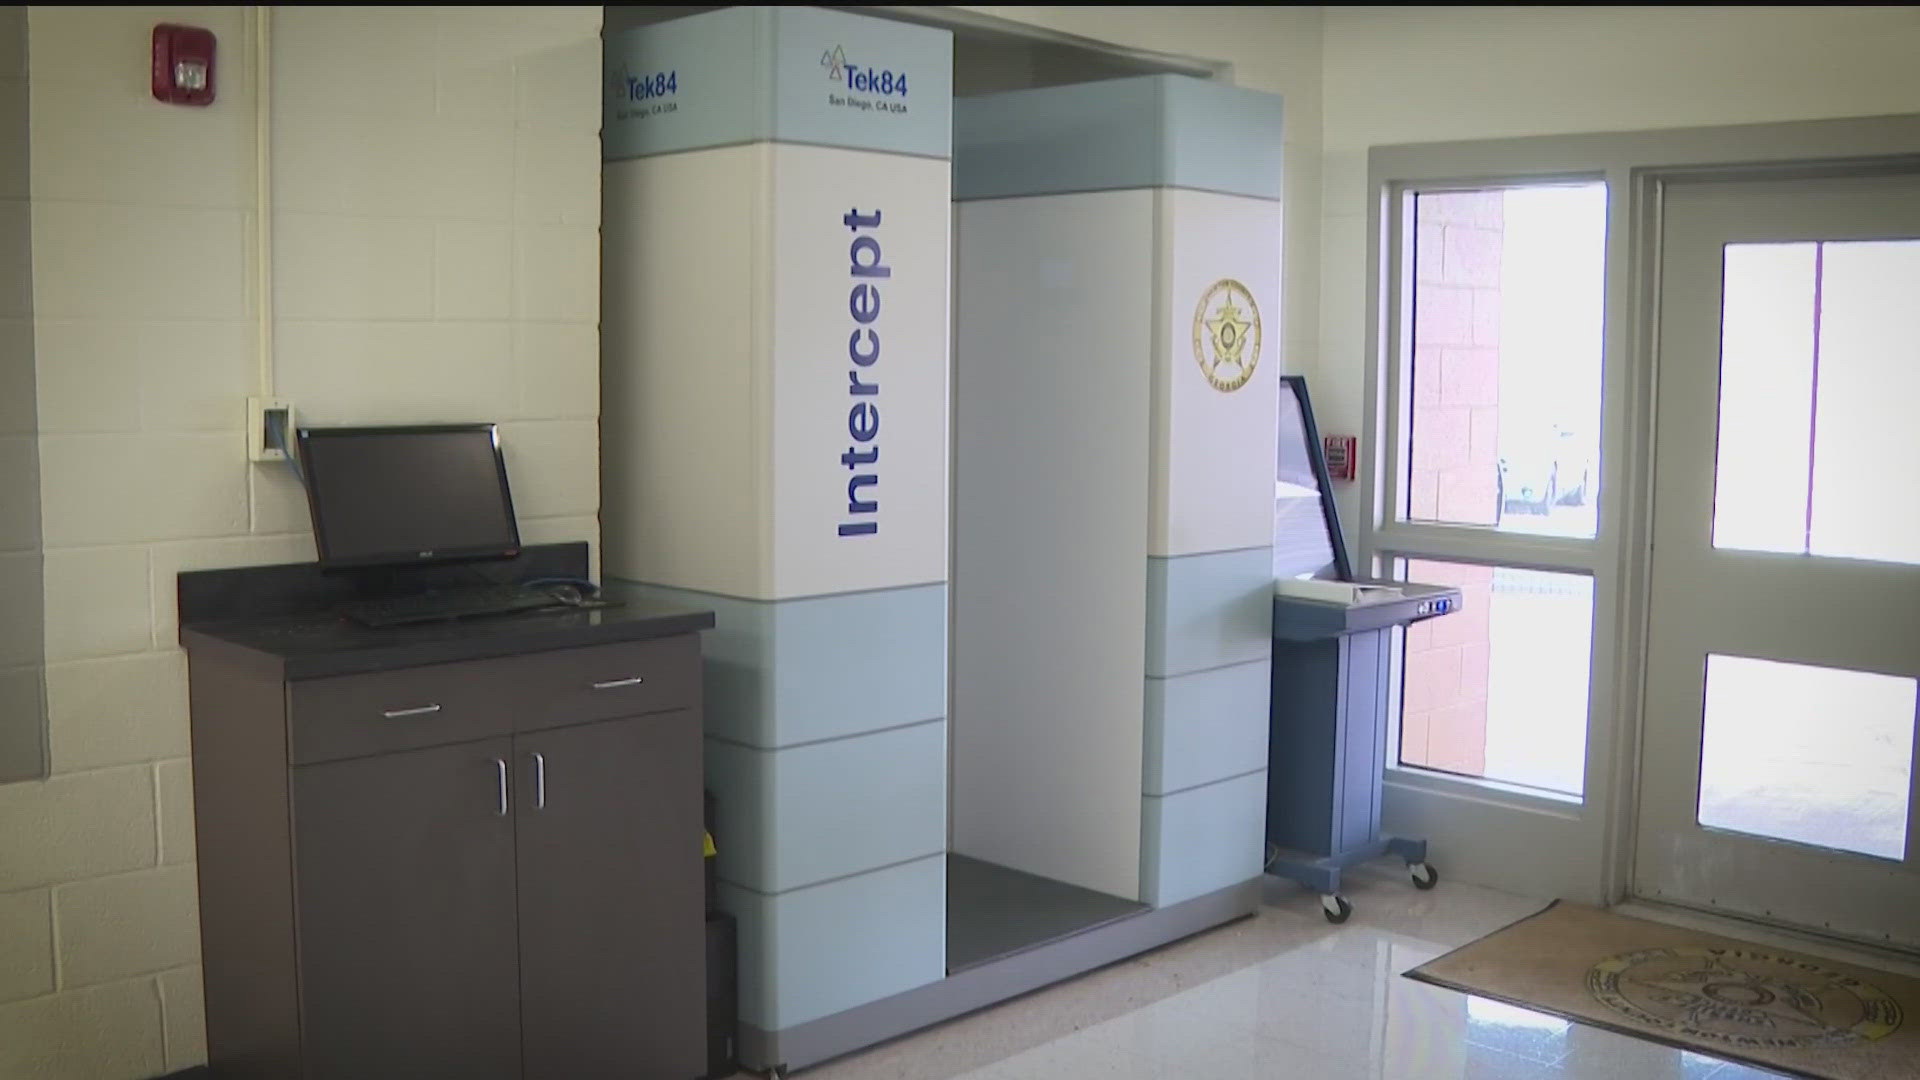 Several jails across the metro also have these scanners. Cobb will unveil its new scanners on Thursday.